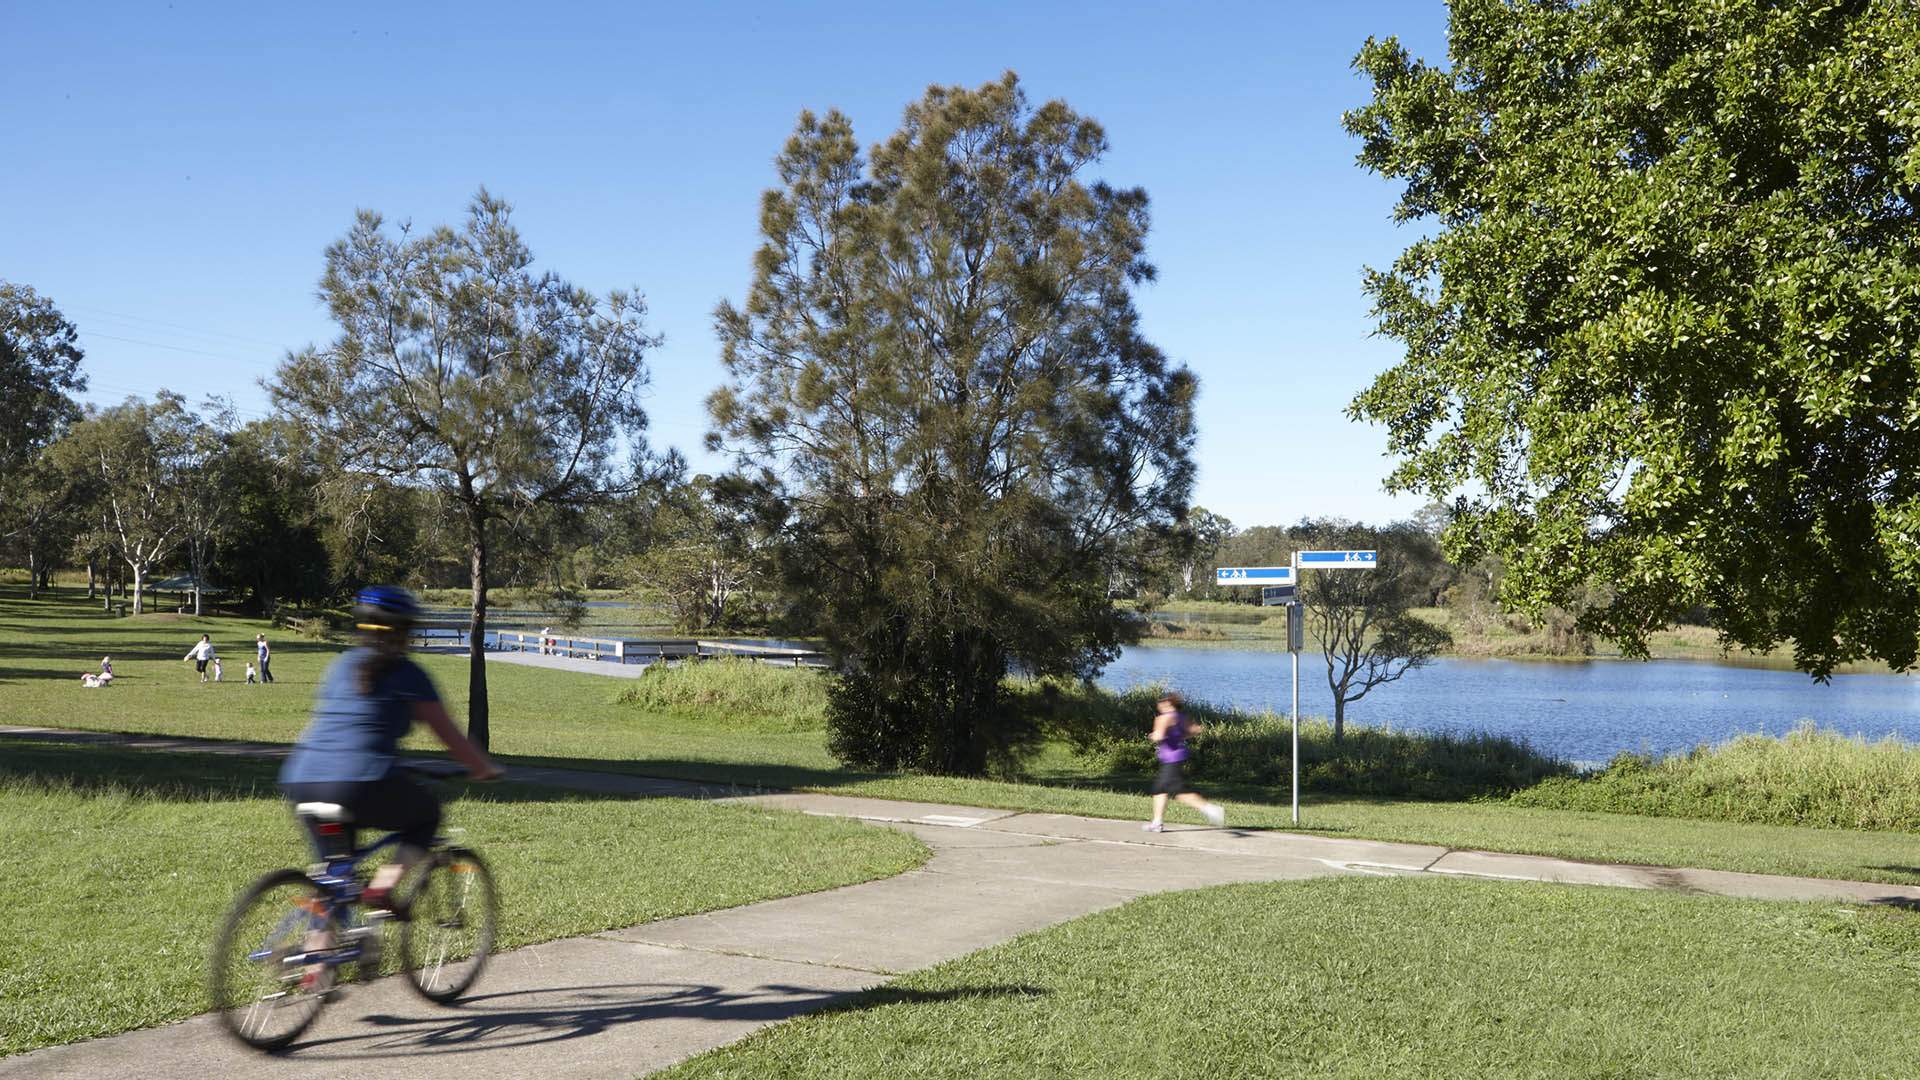 Nine Waterside Picnic Spots In and Around Brisbane That You Might Not Have Visited